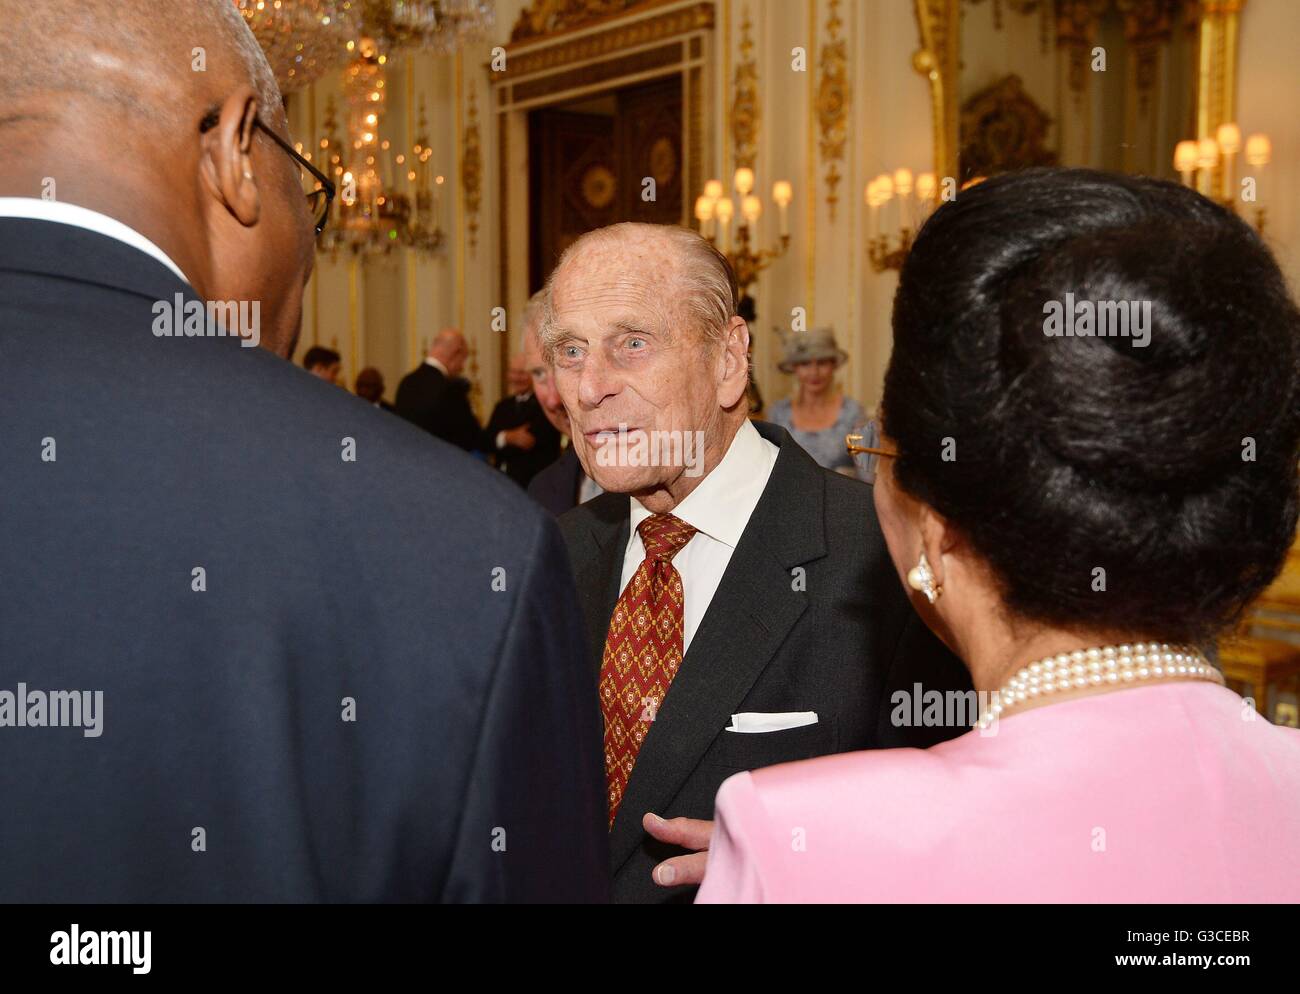 The Duke of Edinburgh meets guests during a reception ahead of the Governor General's lunch at Buckingham Palace in London. Stock Photo